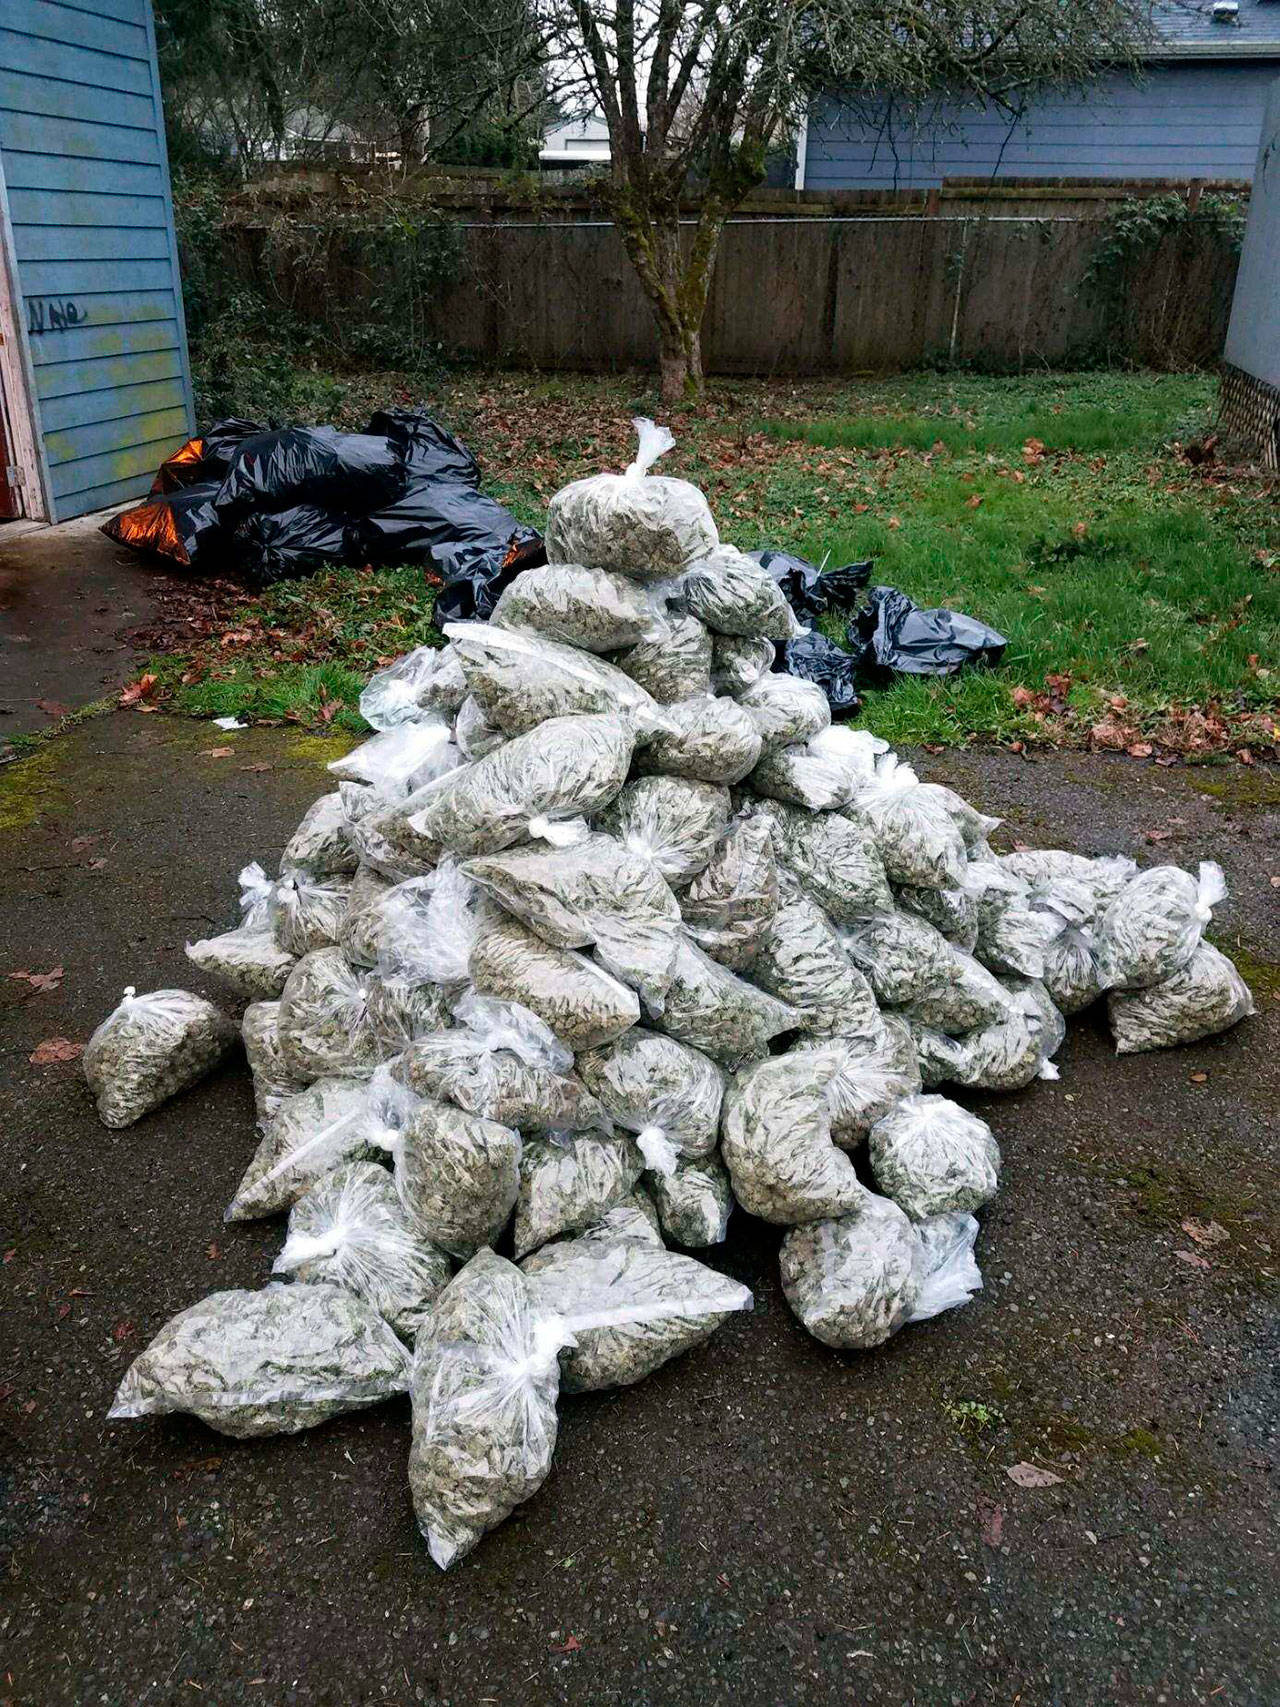 Detectives seize nearly $10 million of illegal marijuana in Renton, other cities